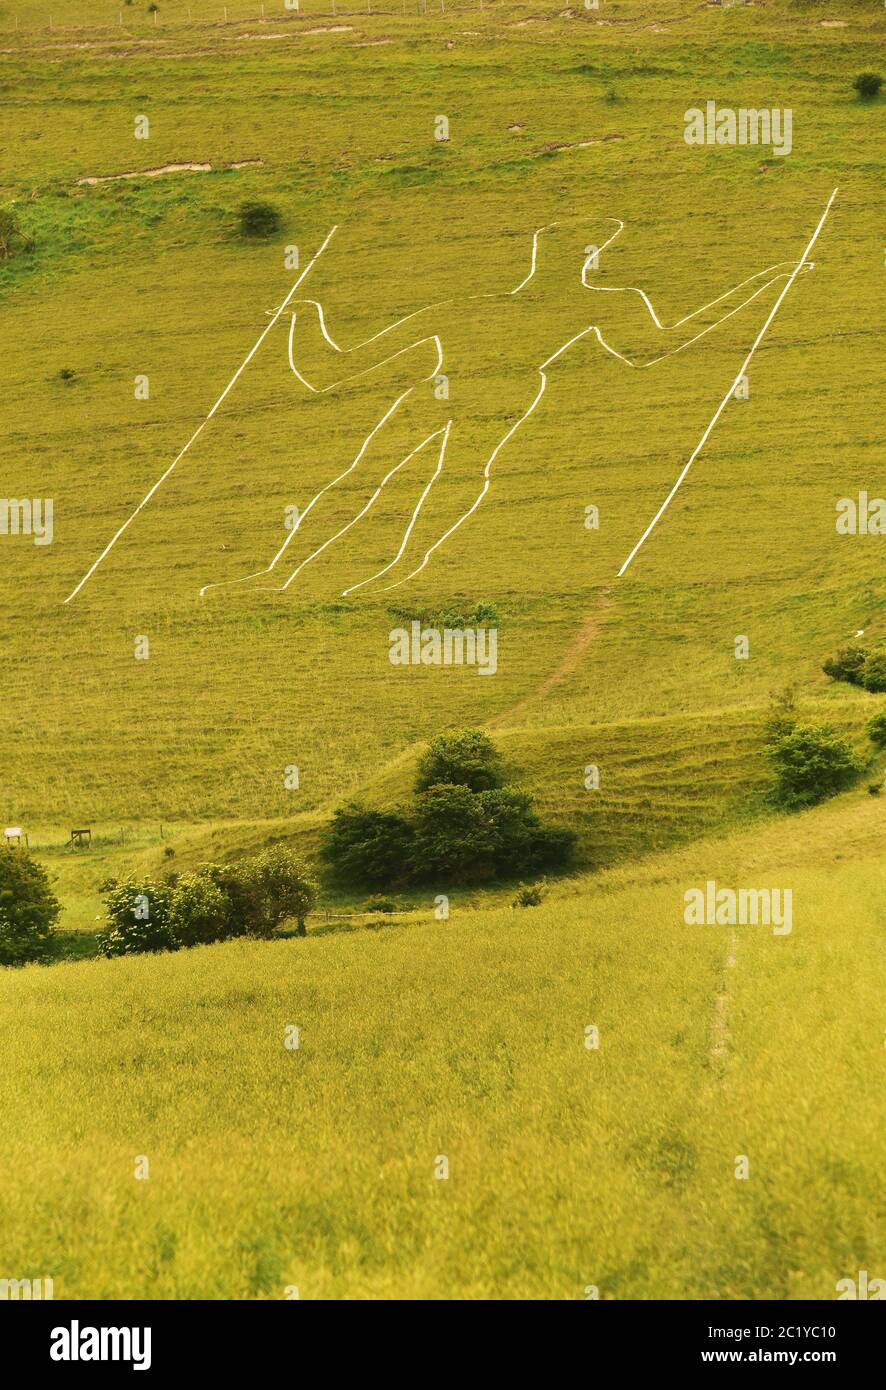 The Long Man of Wilmington Chalk Figure on a Grassy Hillside, Sussex, UK Stock Photo